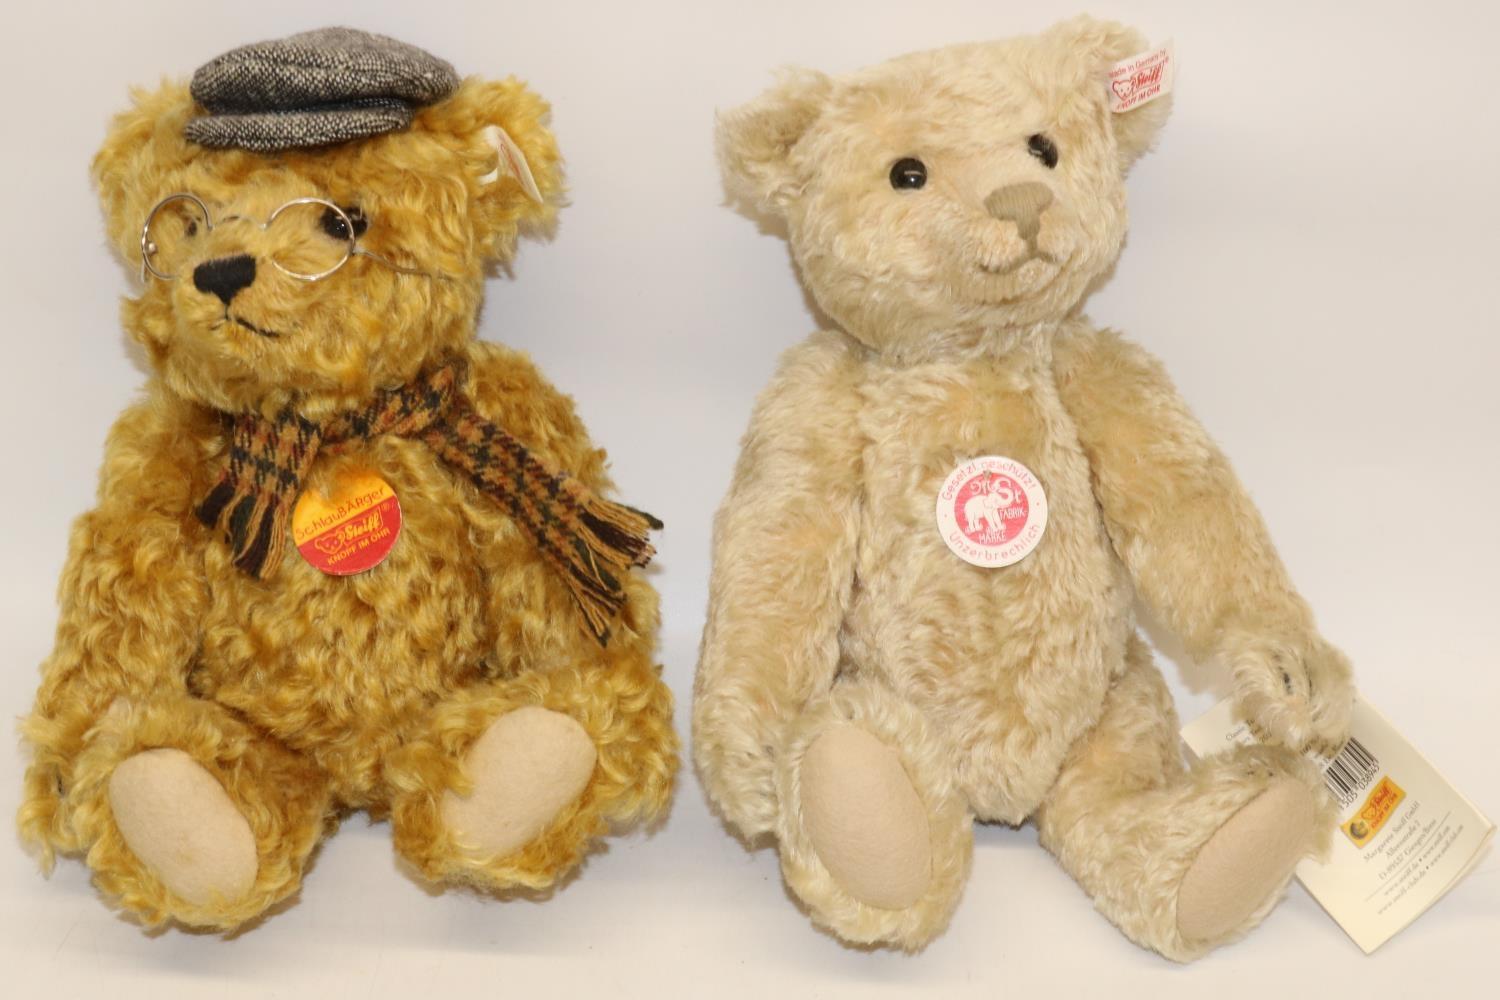 Two Steiff teddy bears: 'Schlaubarger' teddy bear, russet mohair, in flat cap, scarf and glasses,